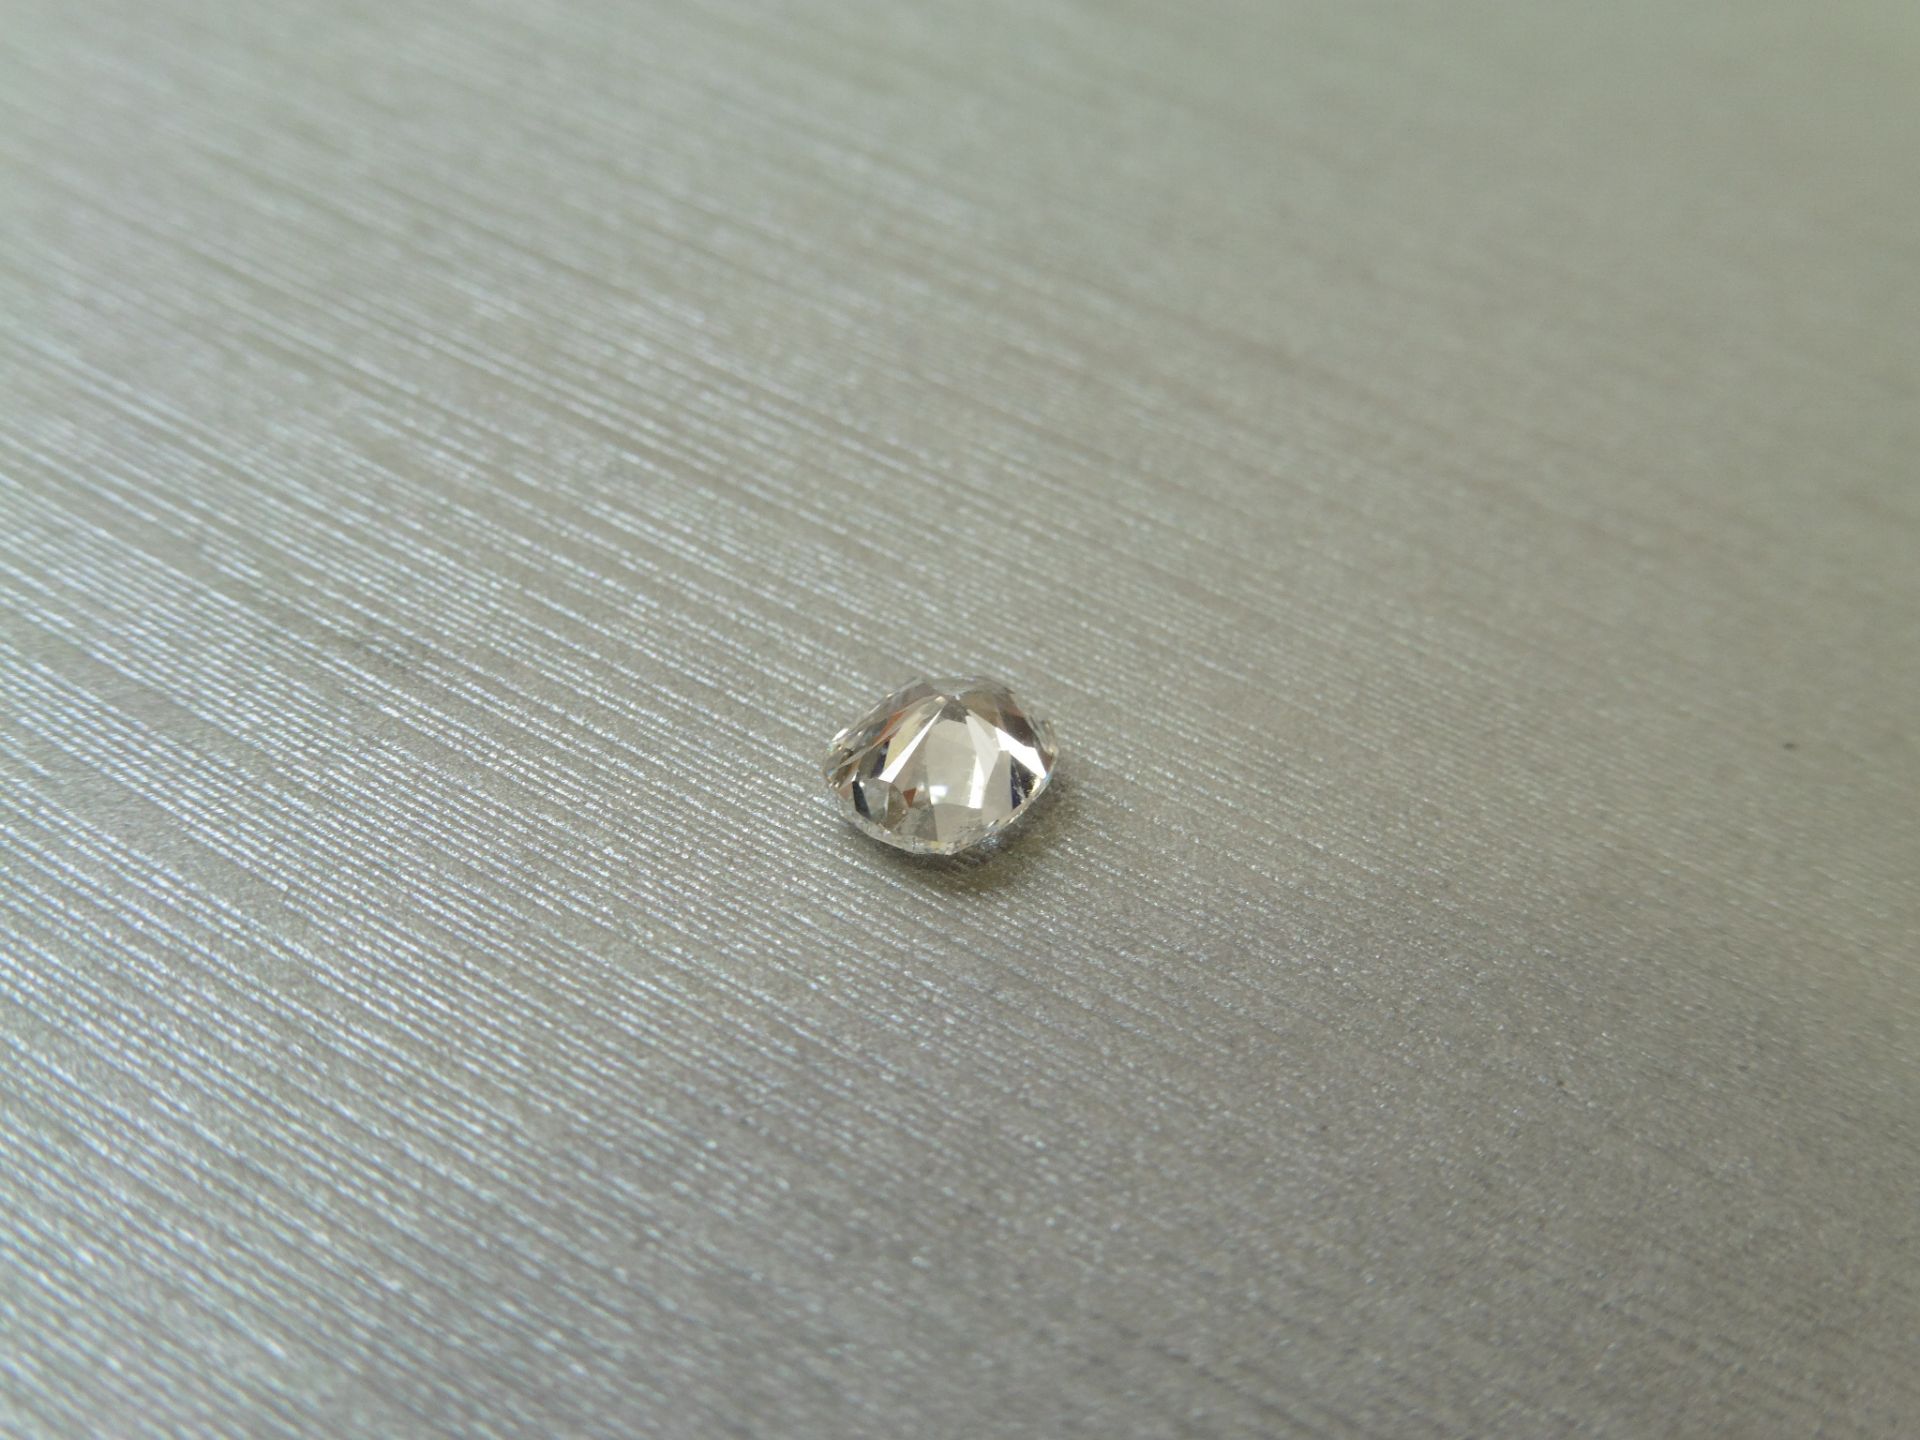 1.01ct single cushion cut diamond. Measurements 6.41 x 5.29 x 3.57mm. F colour and Si2 clarity. - Image 2 of 5